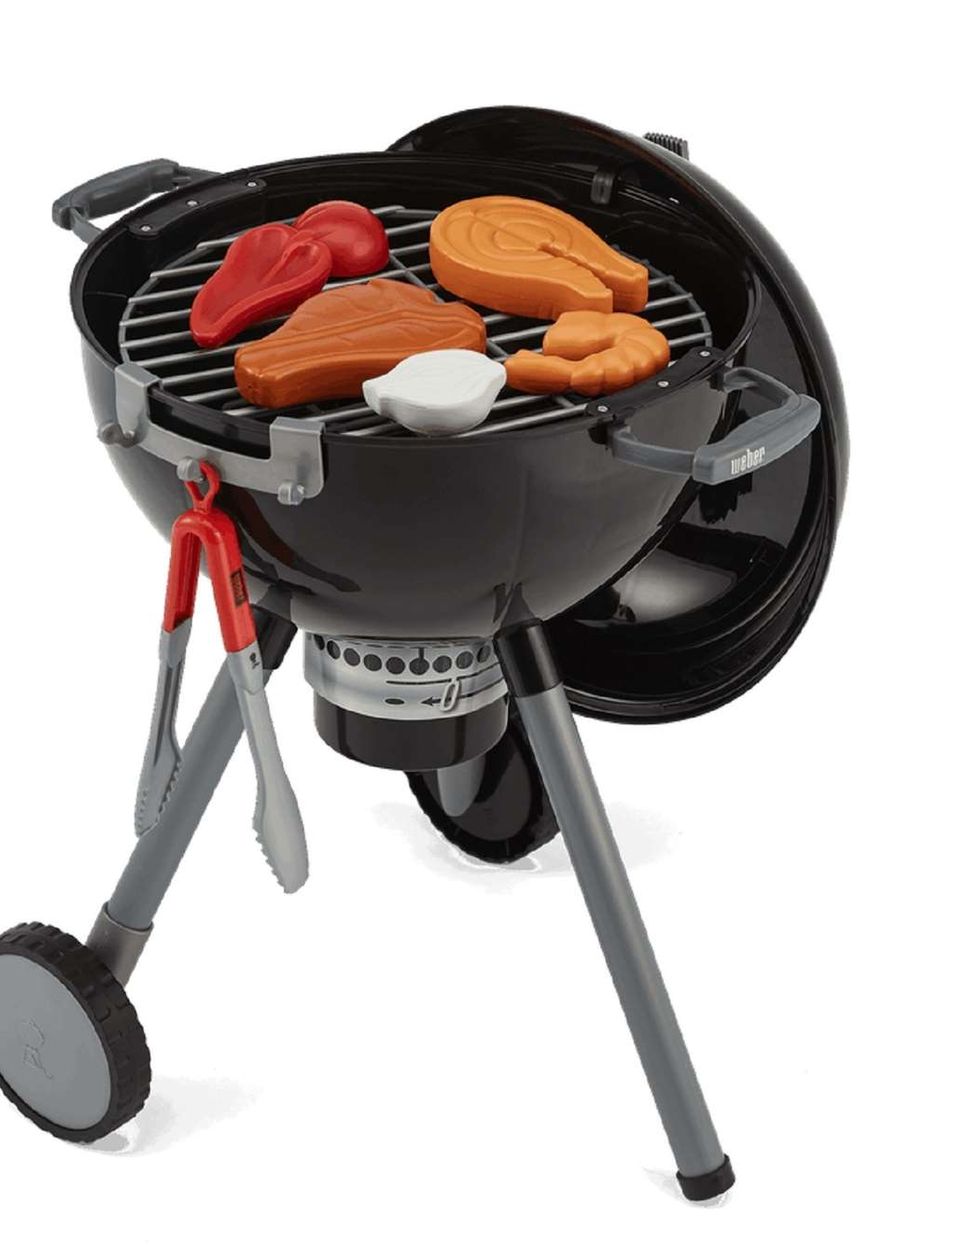 Theo Klein Pretend Play Weber Grill Cooking Set, Black 